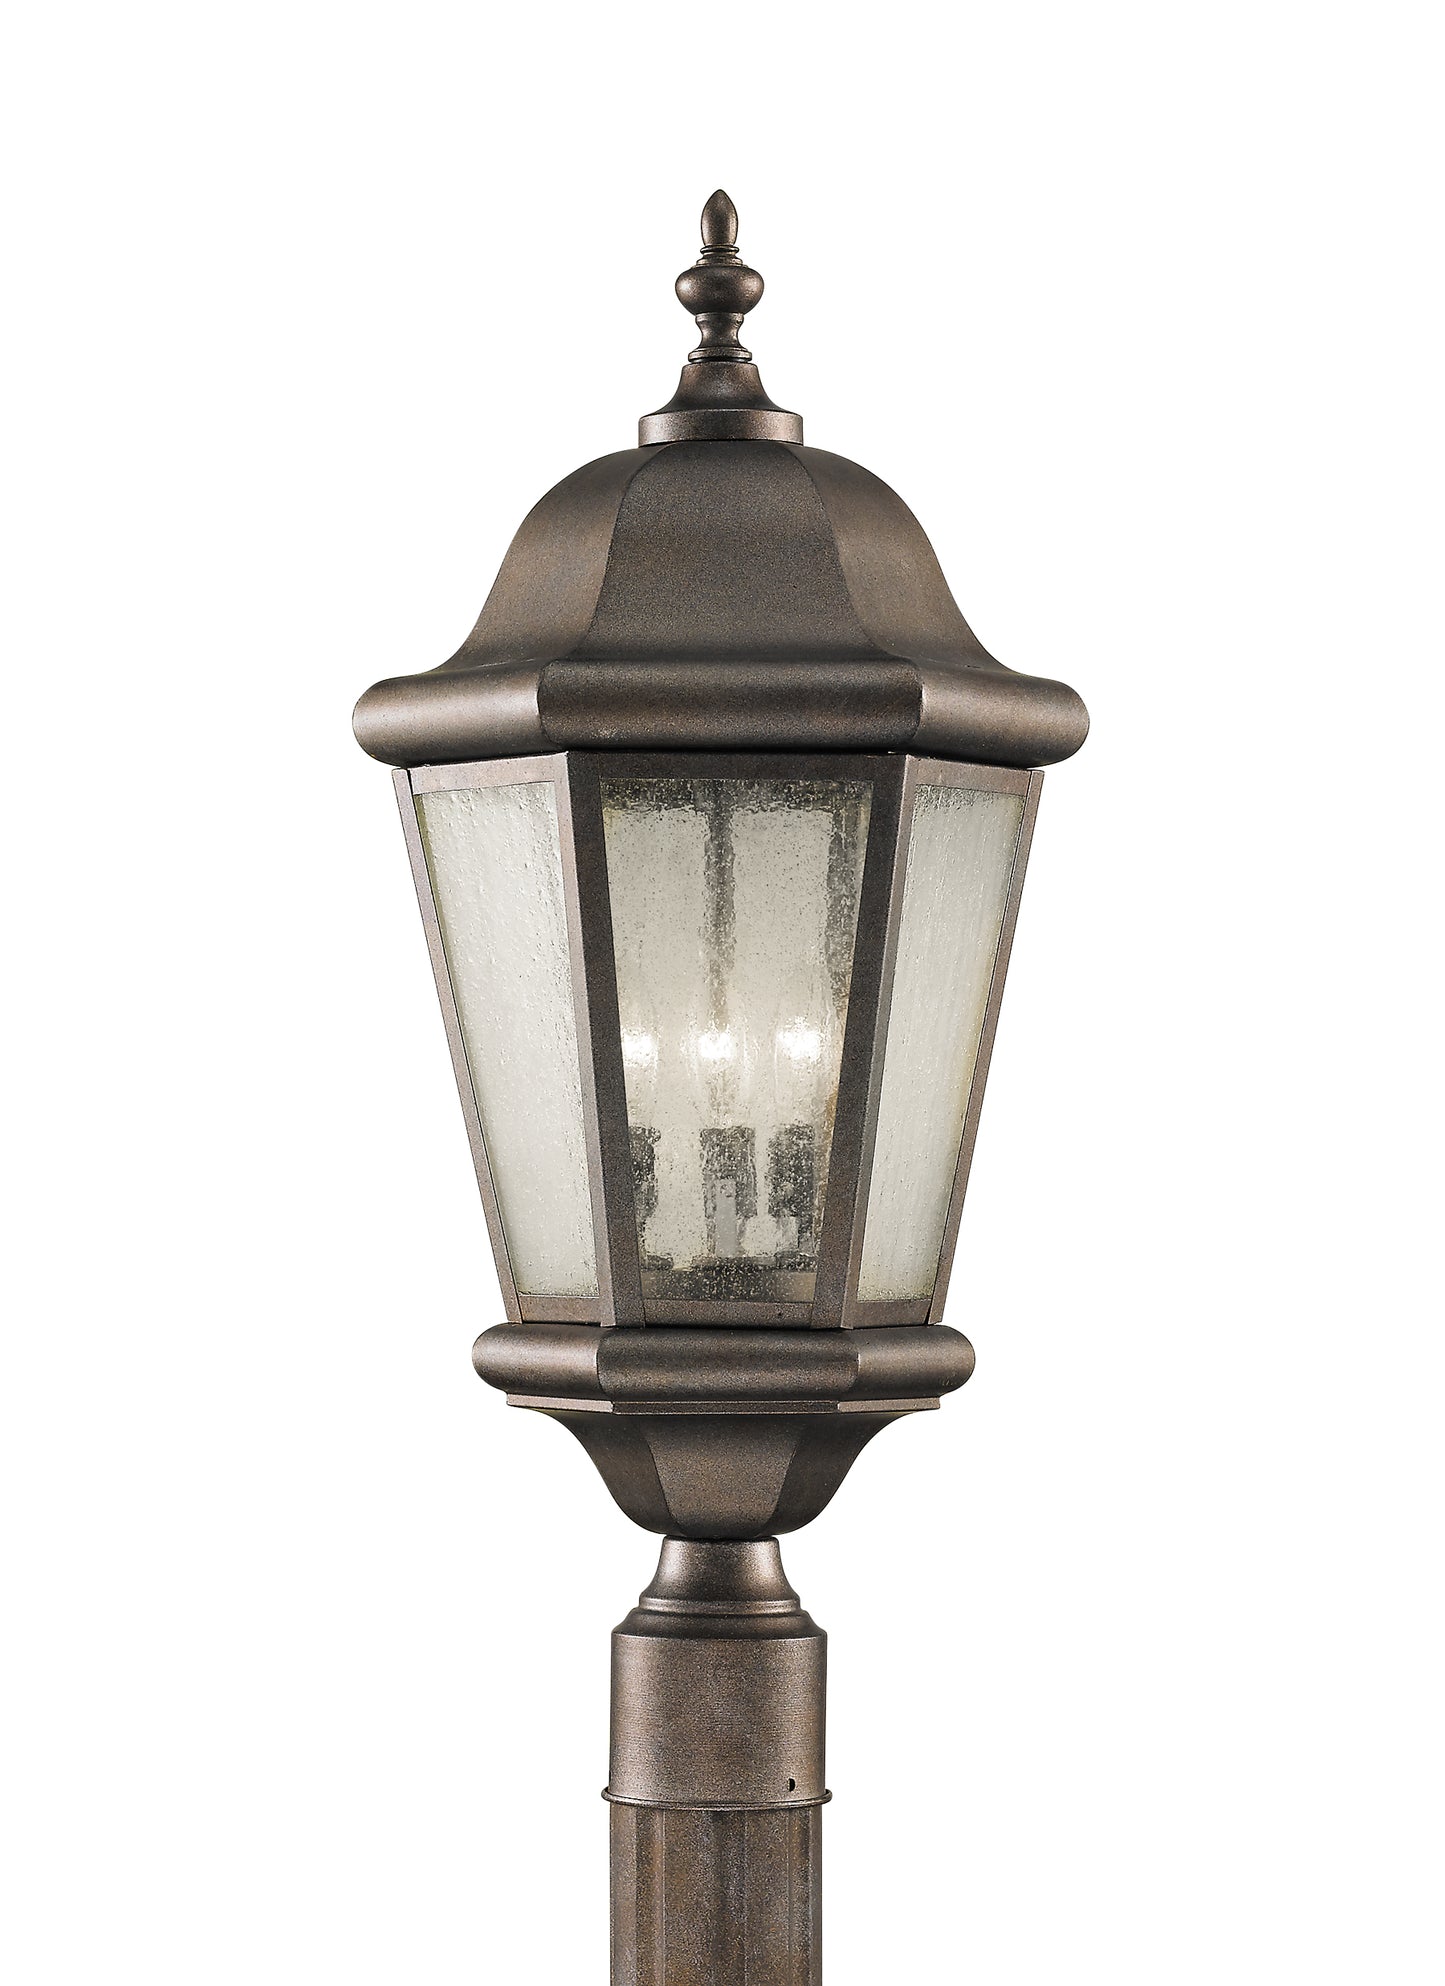 Martinsville traditional 3-light outdoor exterior post lantern in corinthian bronze finish with clear seeded glass shades